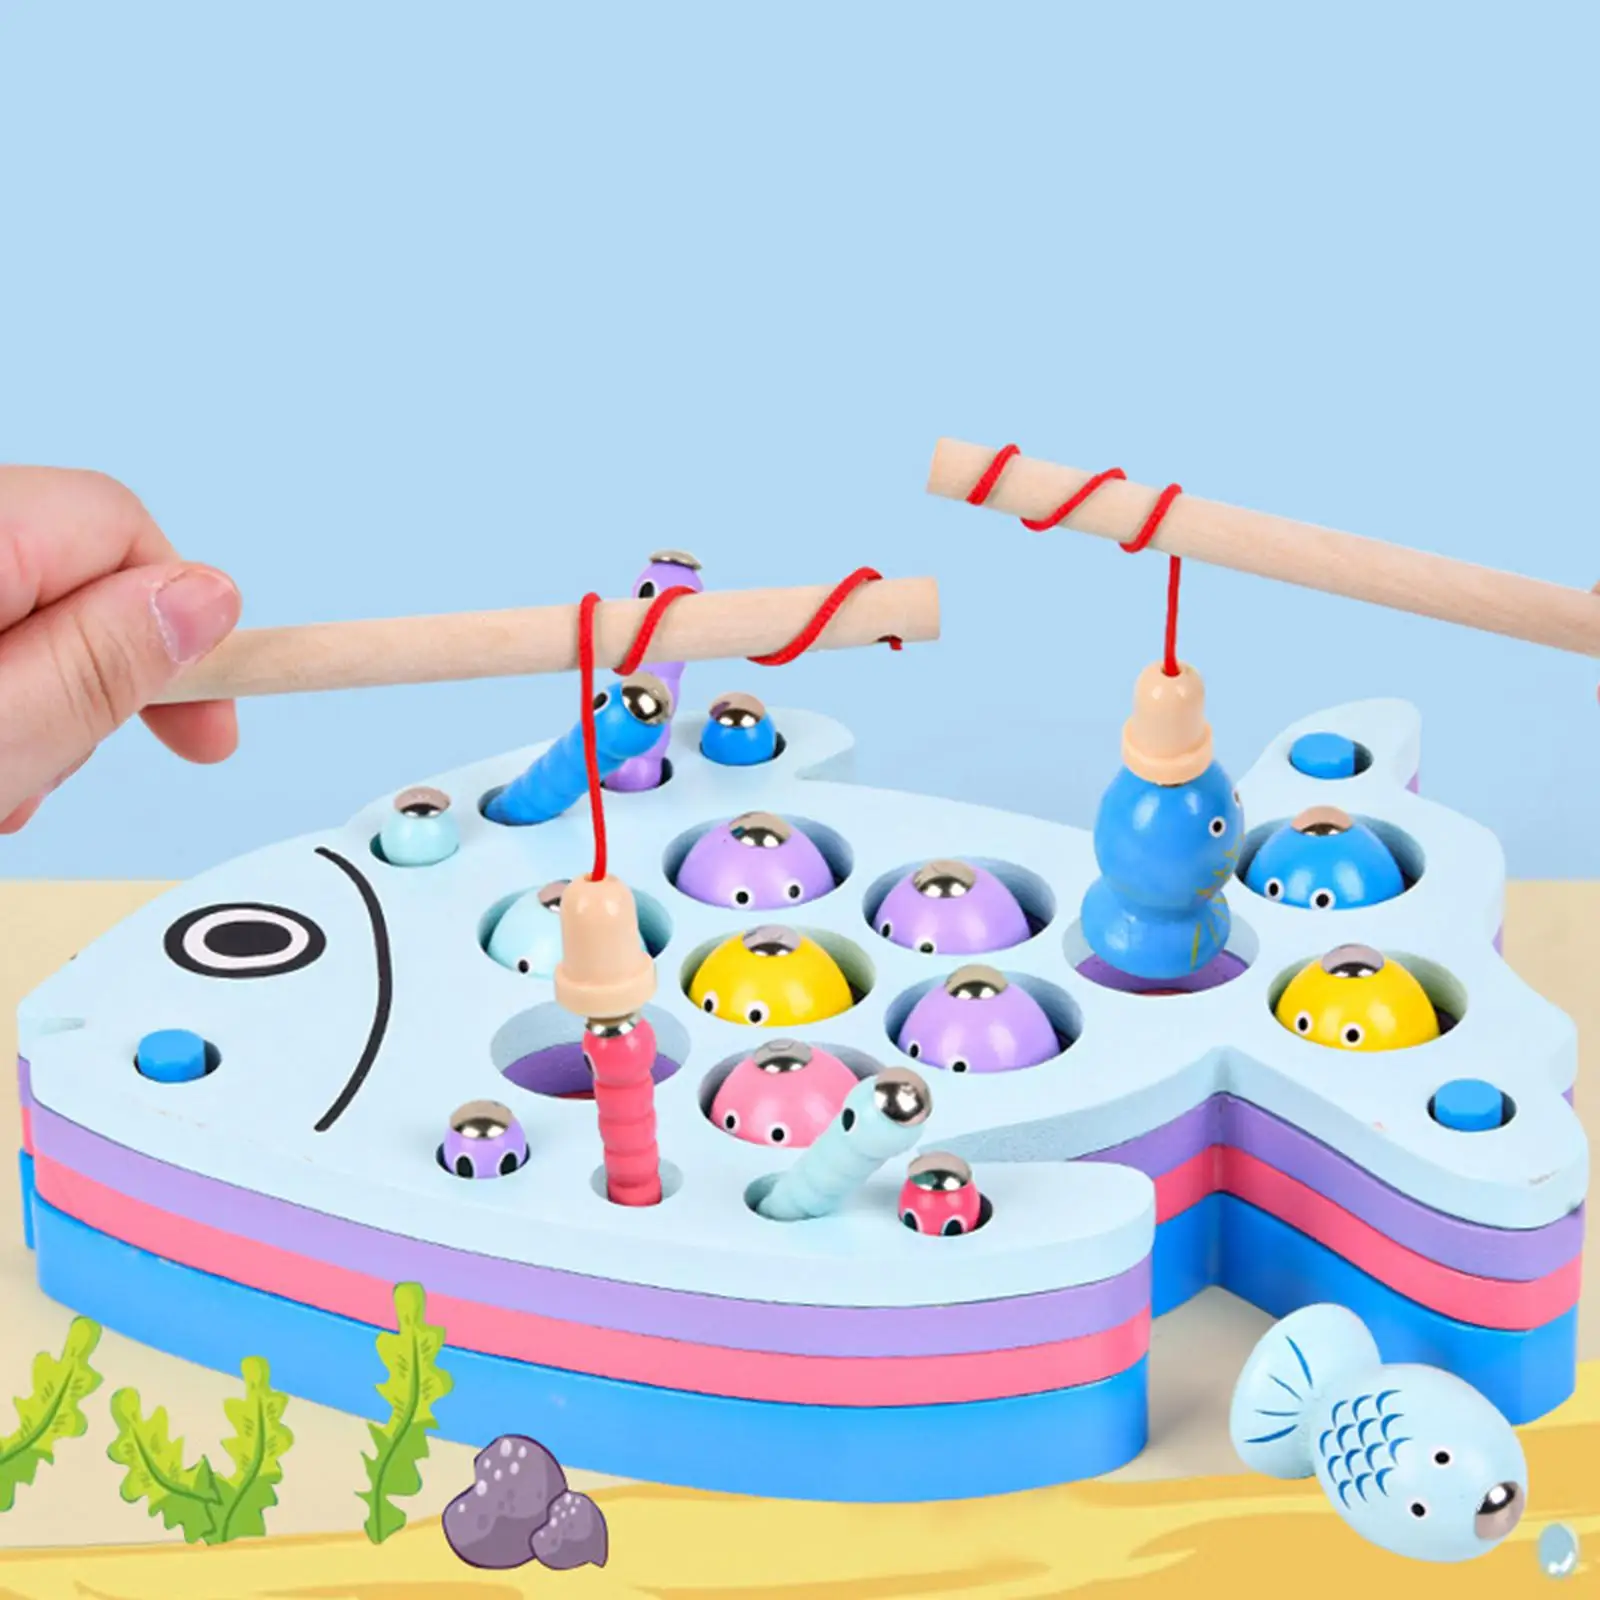 Montessori Toys Wooden Fishing Game for Toddlers 1-3 Years Old Gift